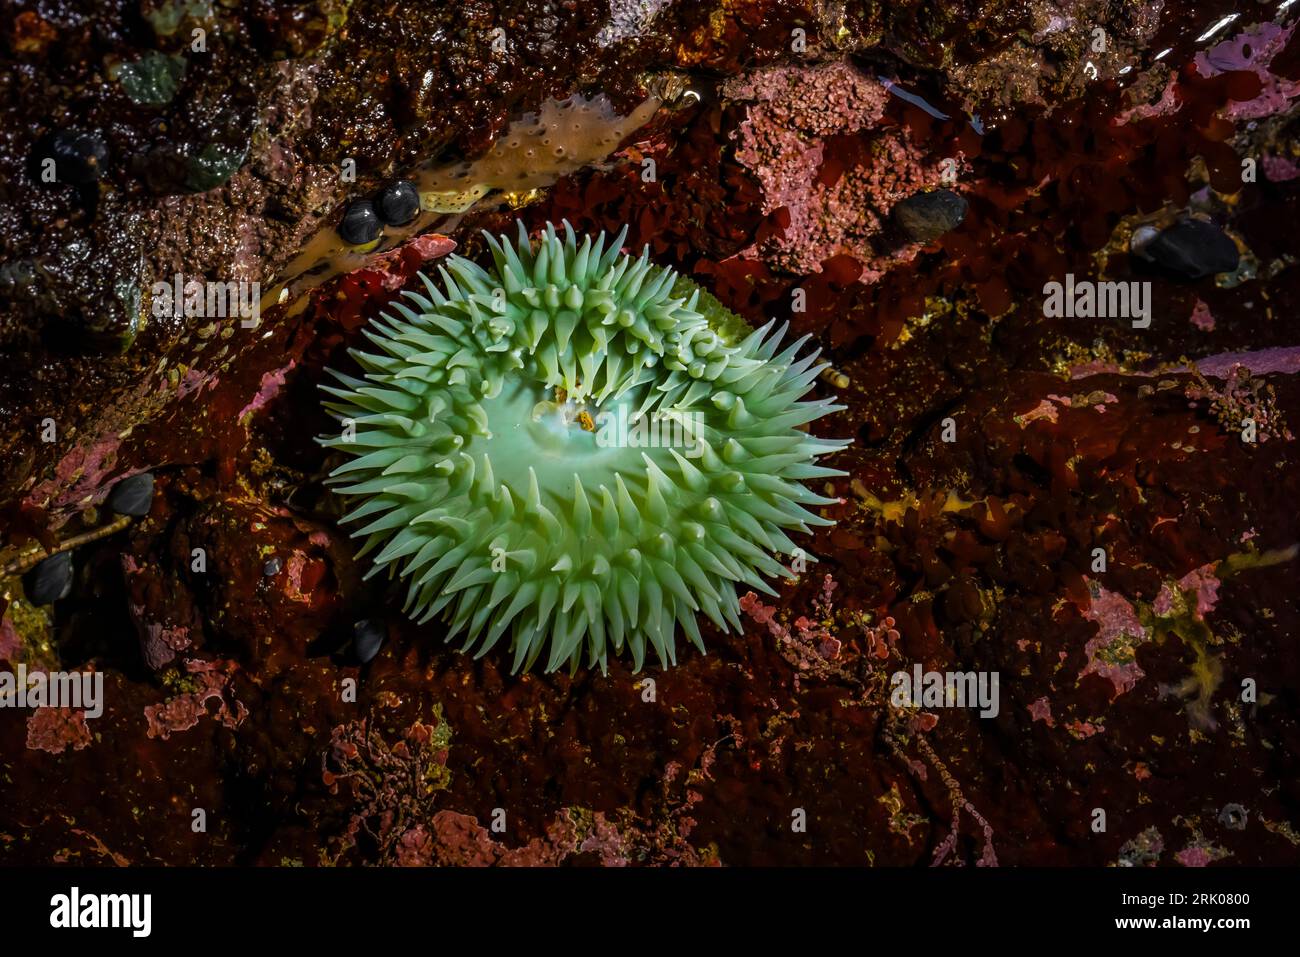 Anemone verde gigante, Anthopleura xanthogrammica, in una piscina di marea a Point of Arches, Olympic National Park, Washington State, USA Foto Stock